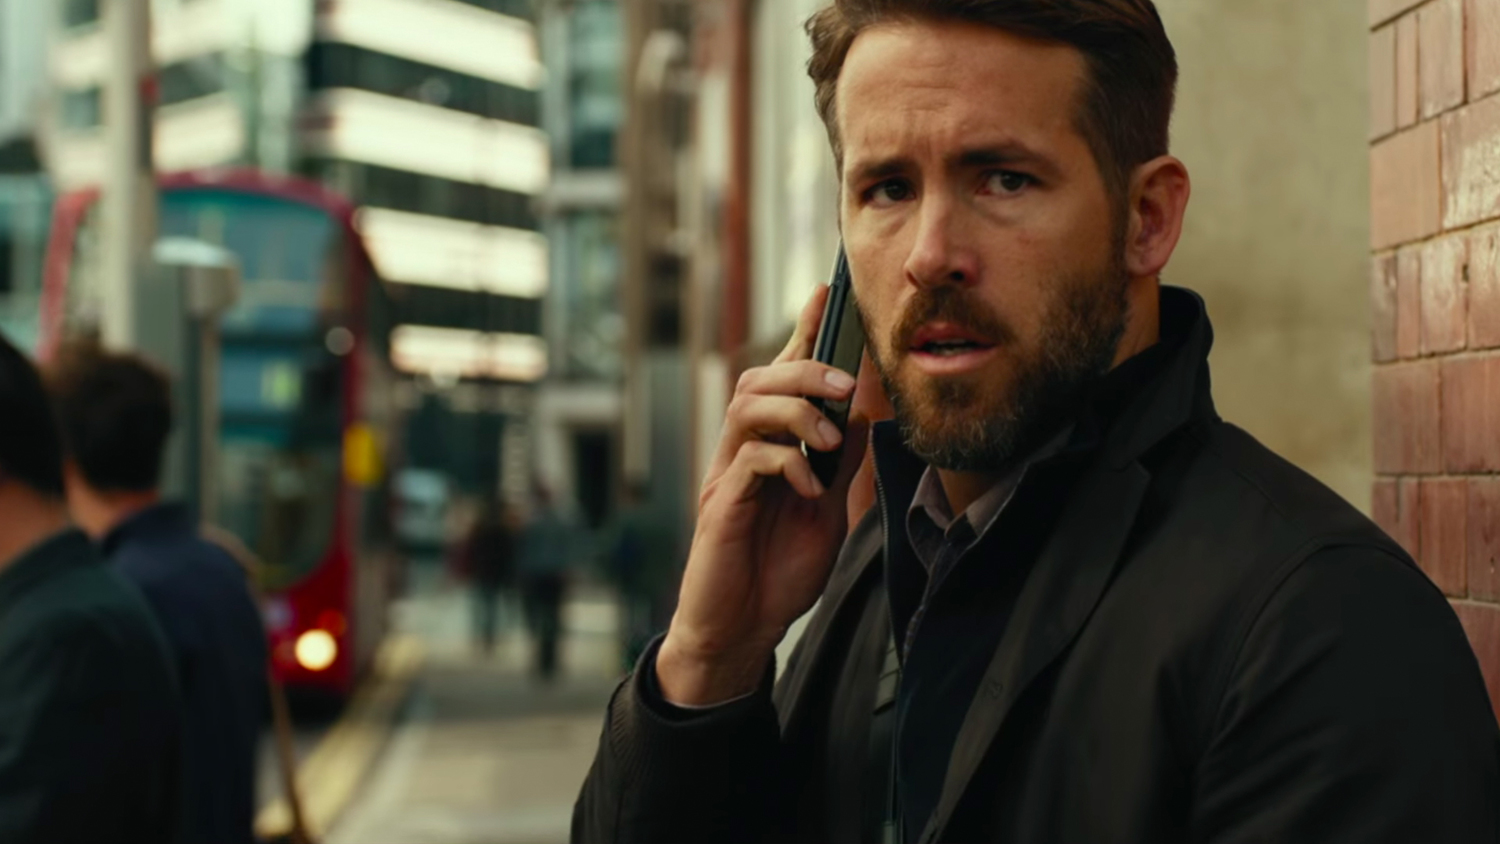 Watch: CRIMINAL Trailer Features Ryan Reynolds in Yet Another Body Swap